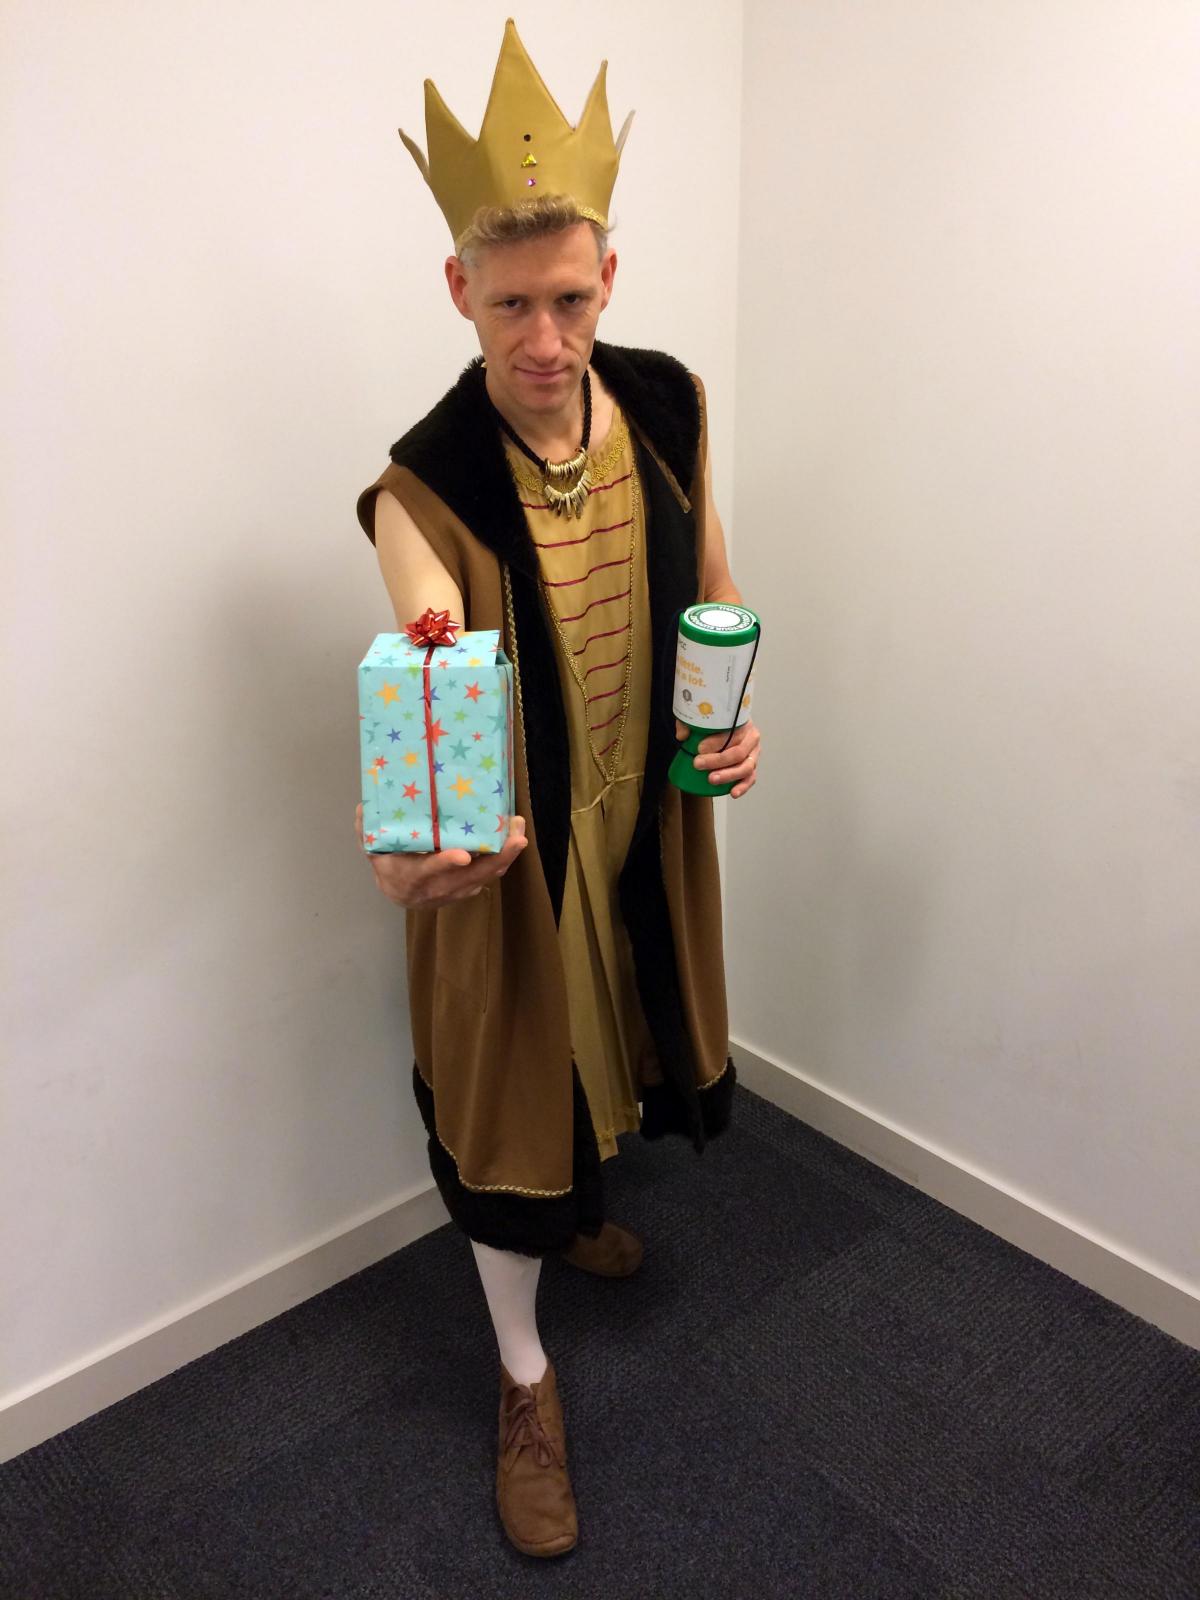 Saul Duck as one of the Three Kings